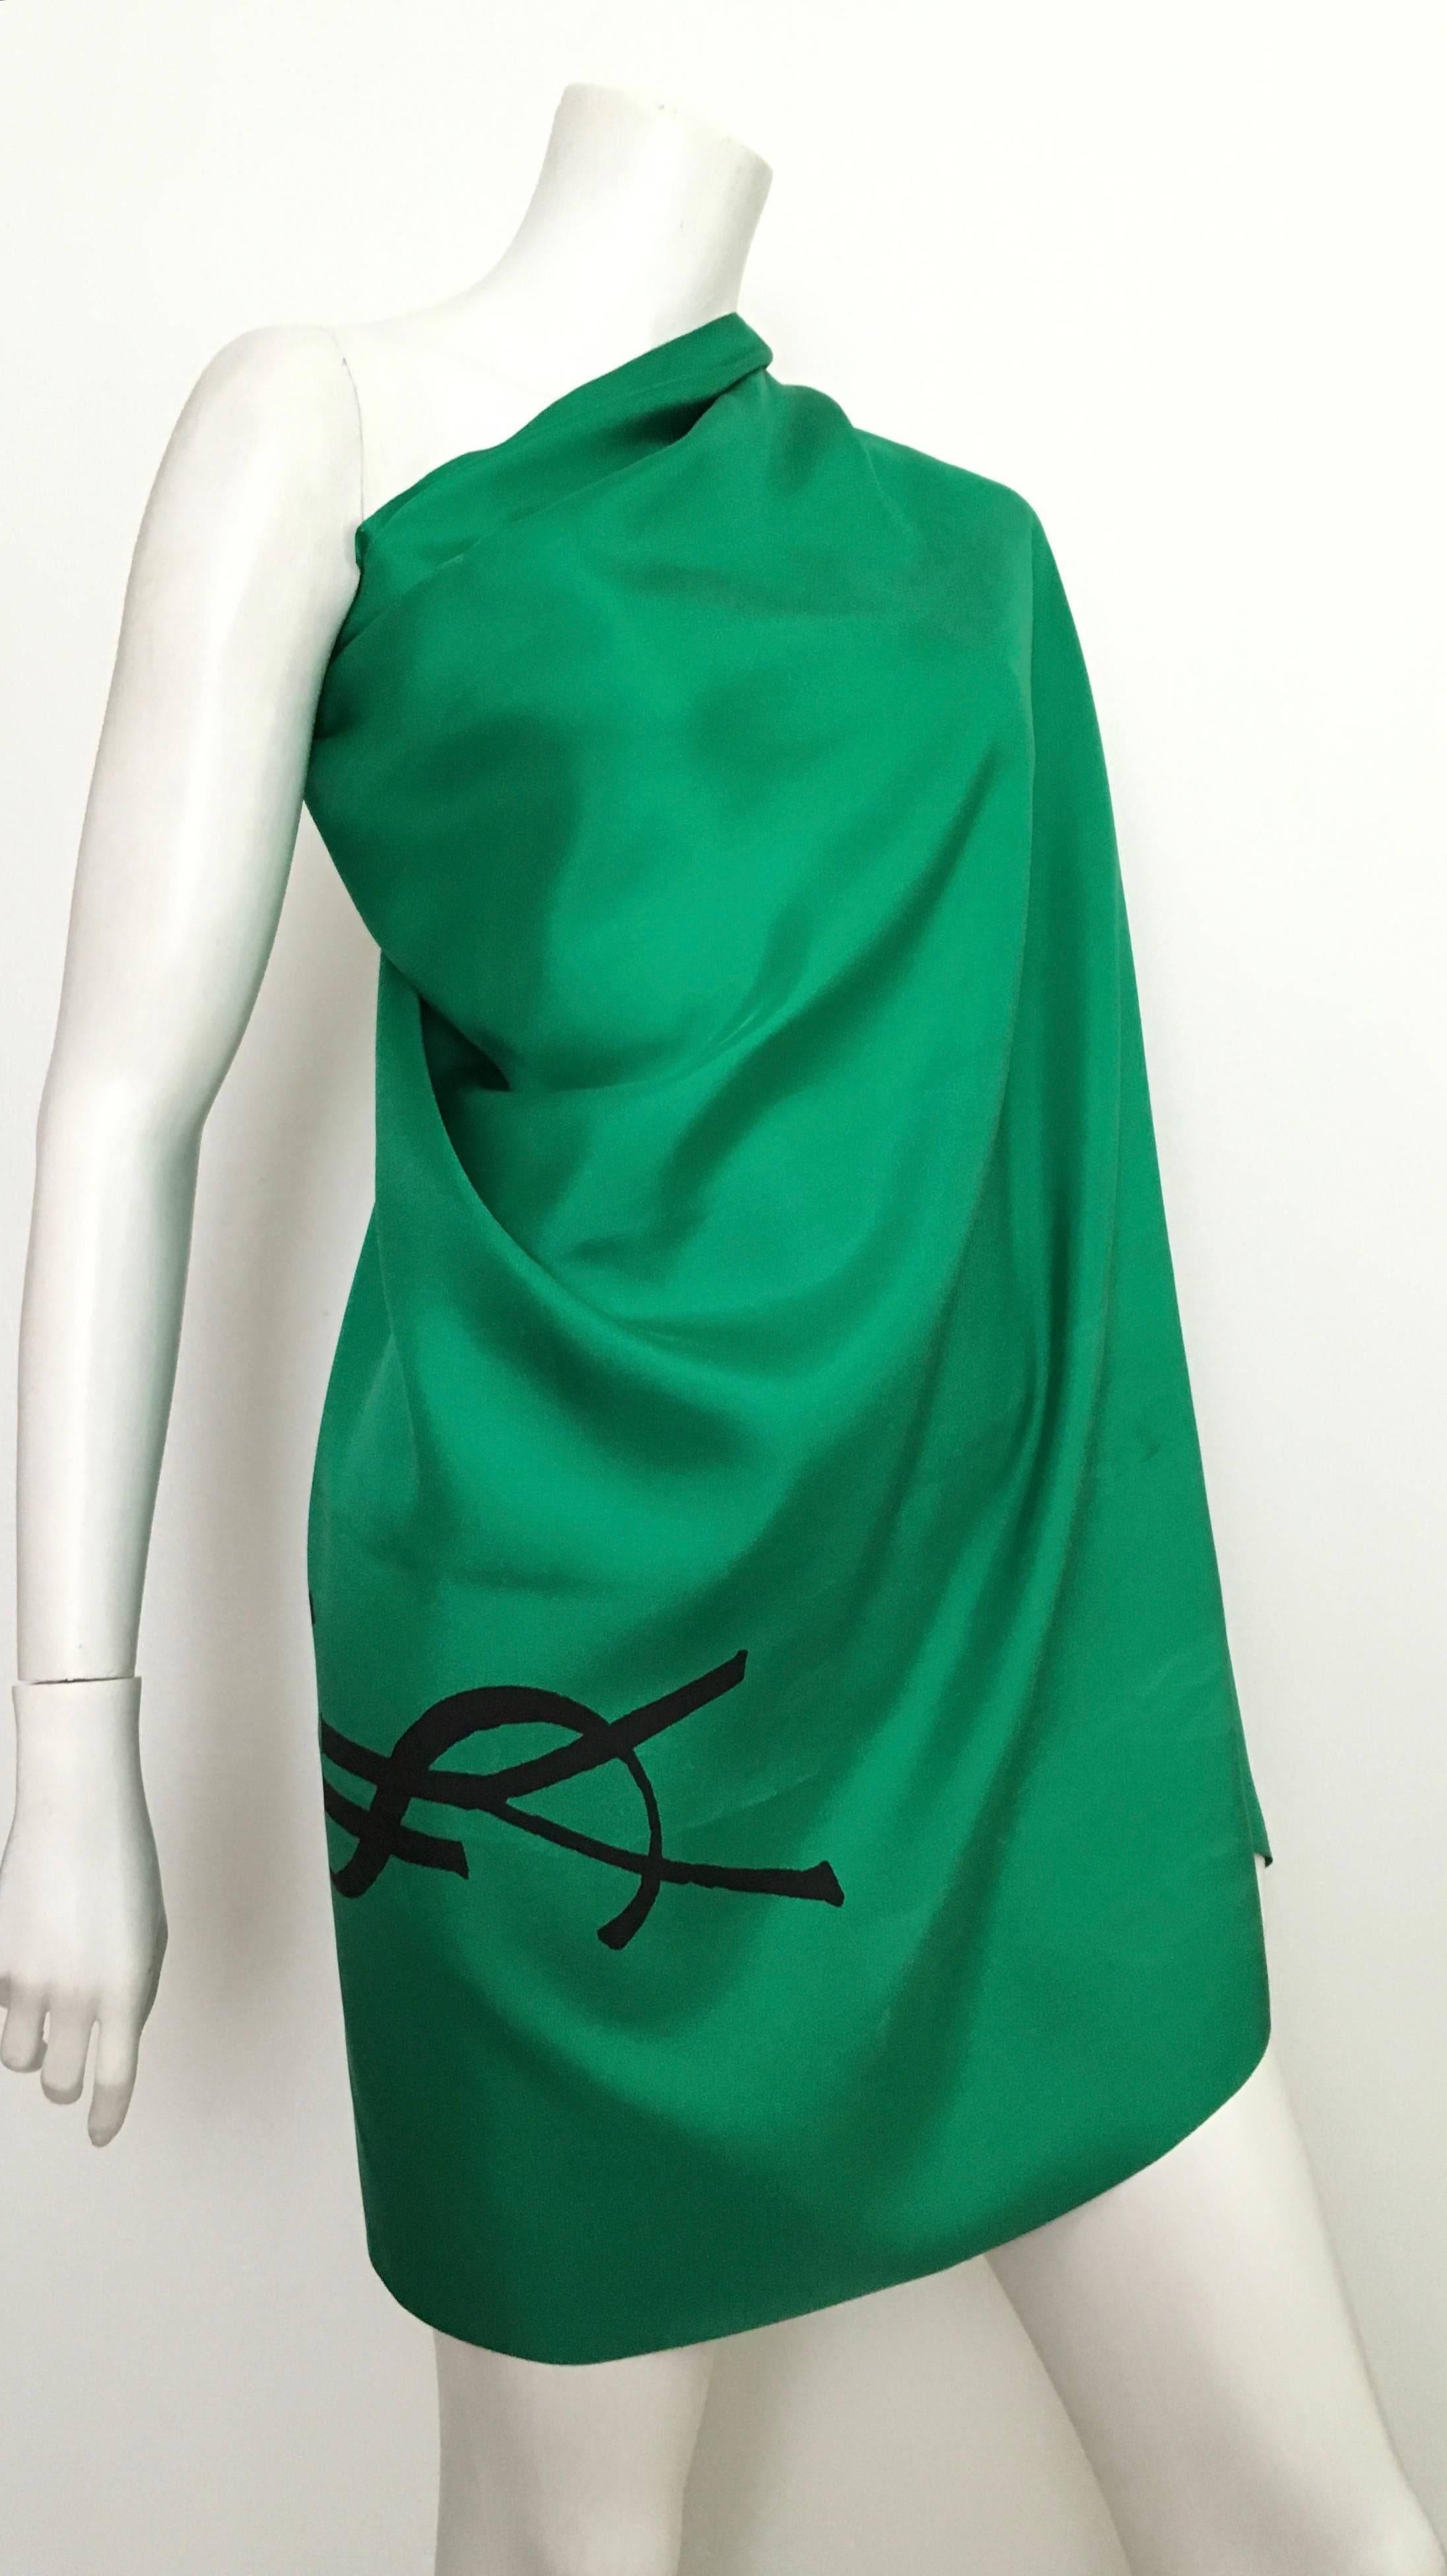 Yves Saint Laurent 1980s emerald green large silk scarf made in France.  The Made in France label is missing on this scarf.  This is from the private collection of a wealthy Atlanta woman, this one as well as the red one I have listed as well were